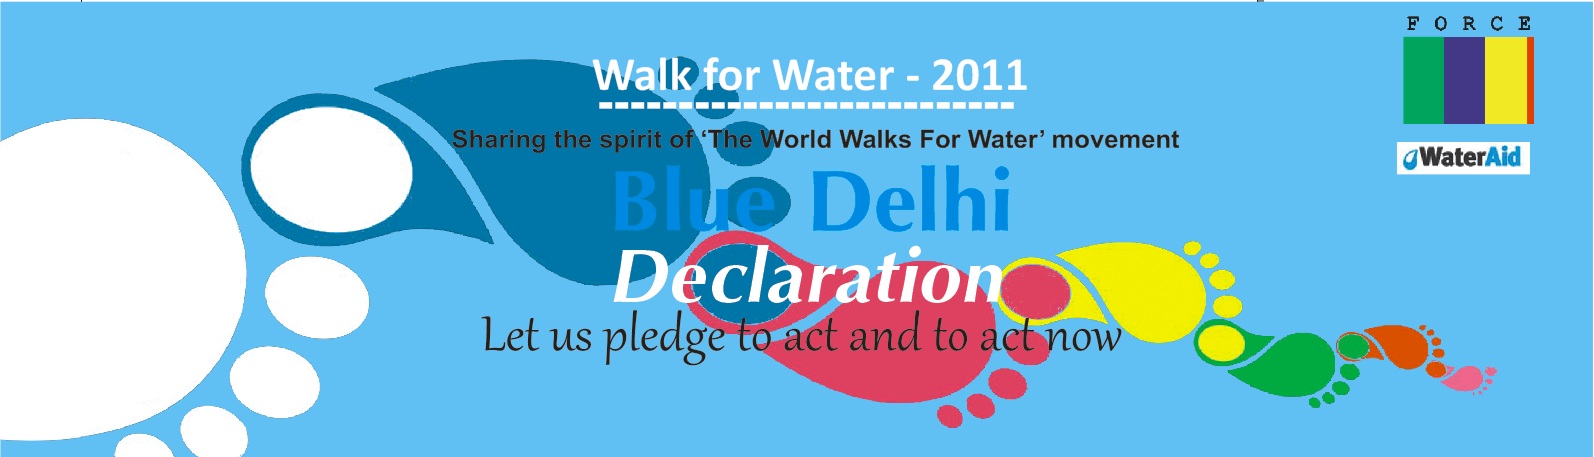 Walk for Water – 2011